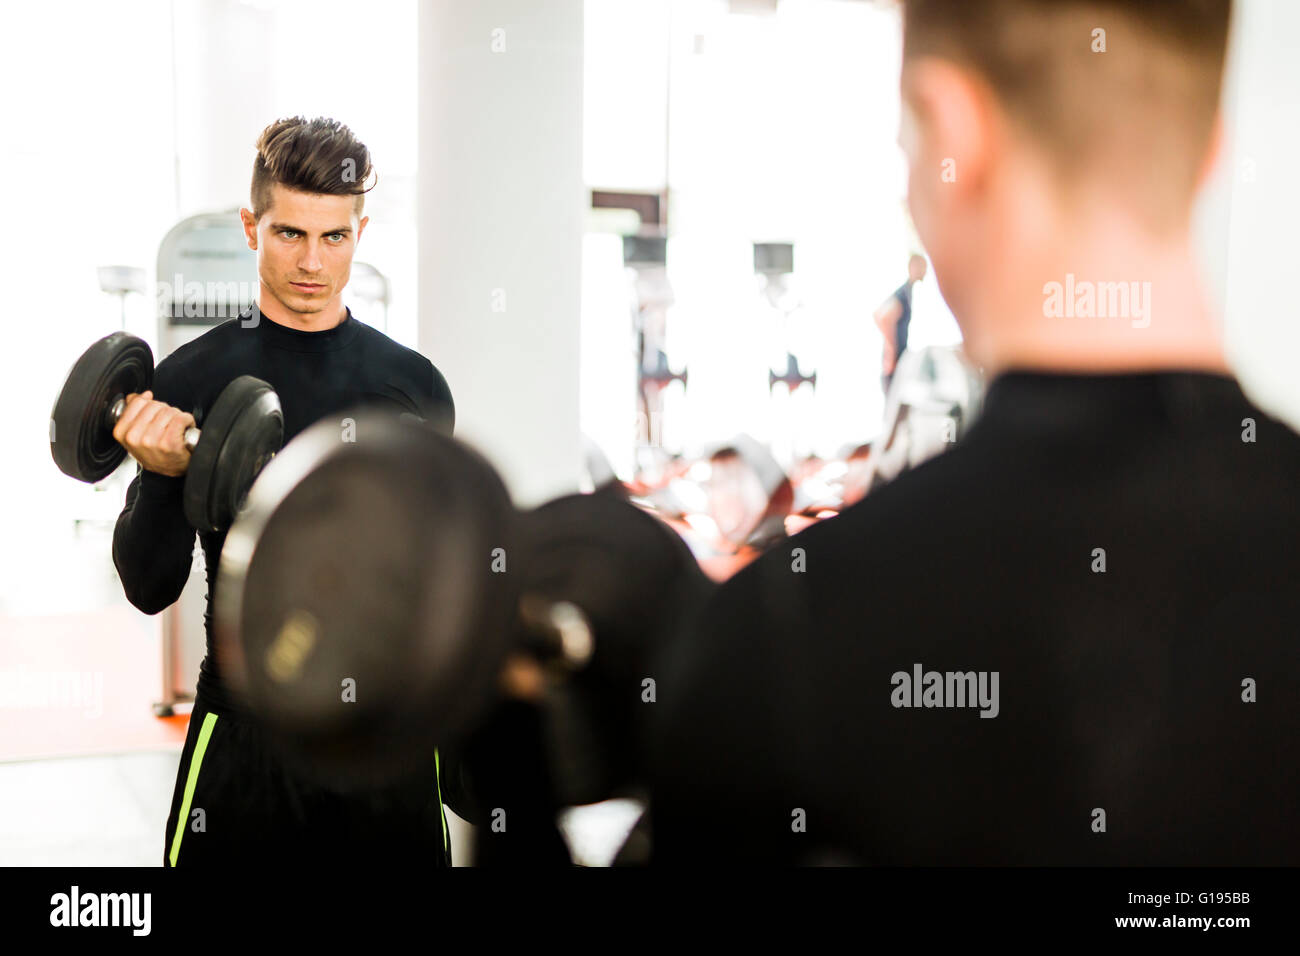 Young muscular man working out in a gym and lifting weights with his reflection showing in a mirror Stock Photo